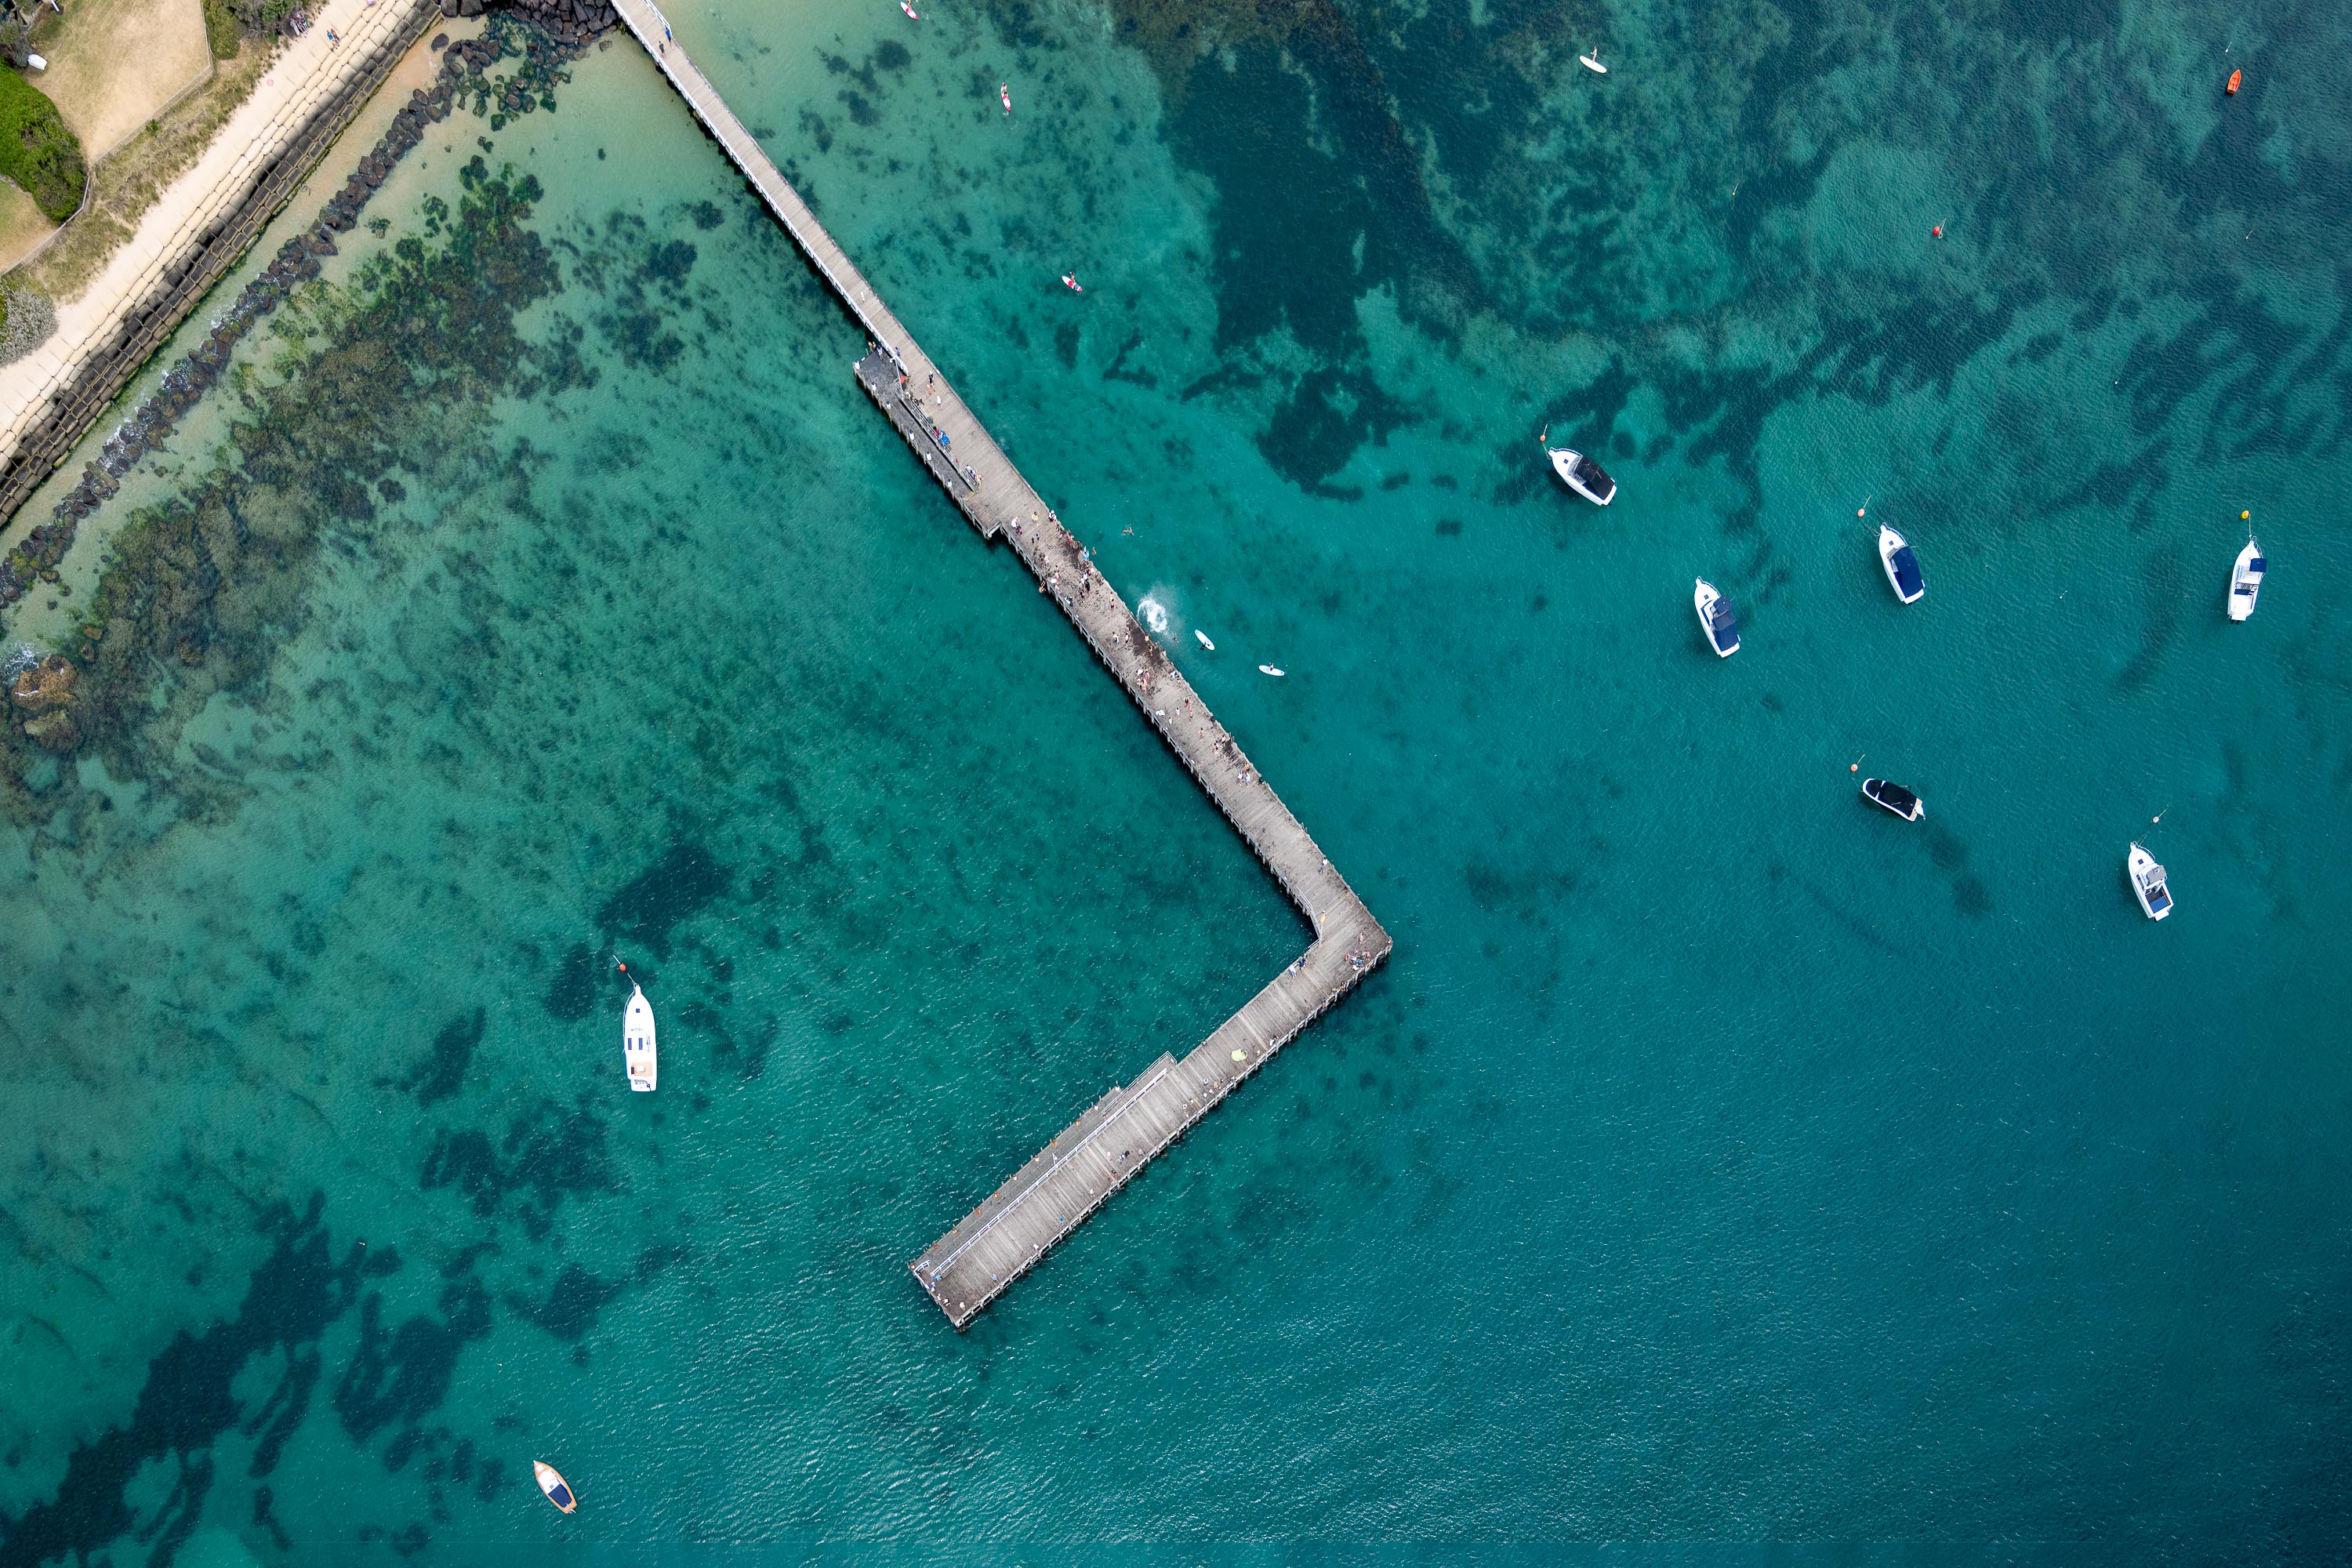 Portsea Pier from above